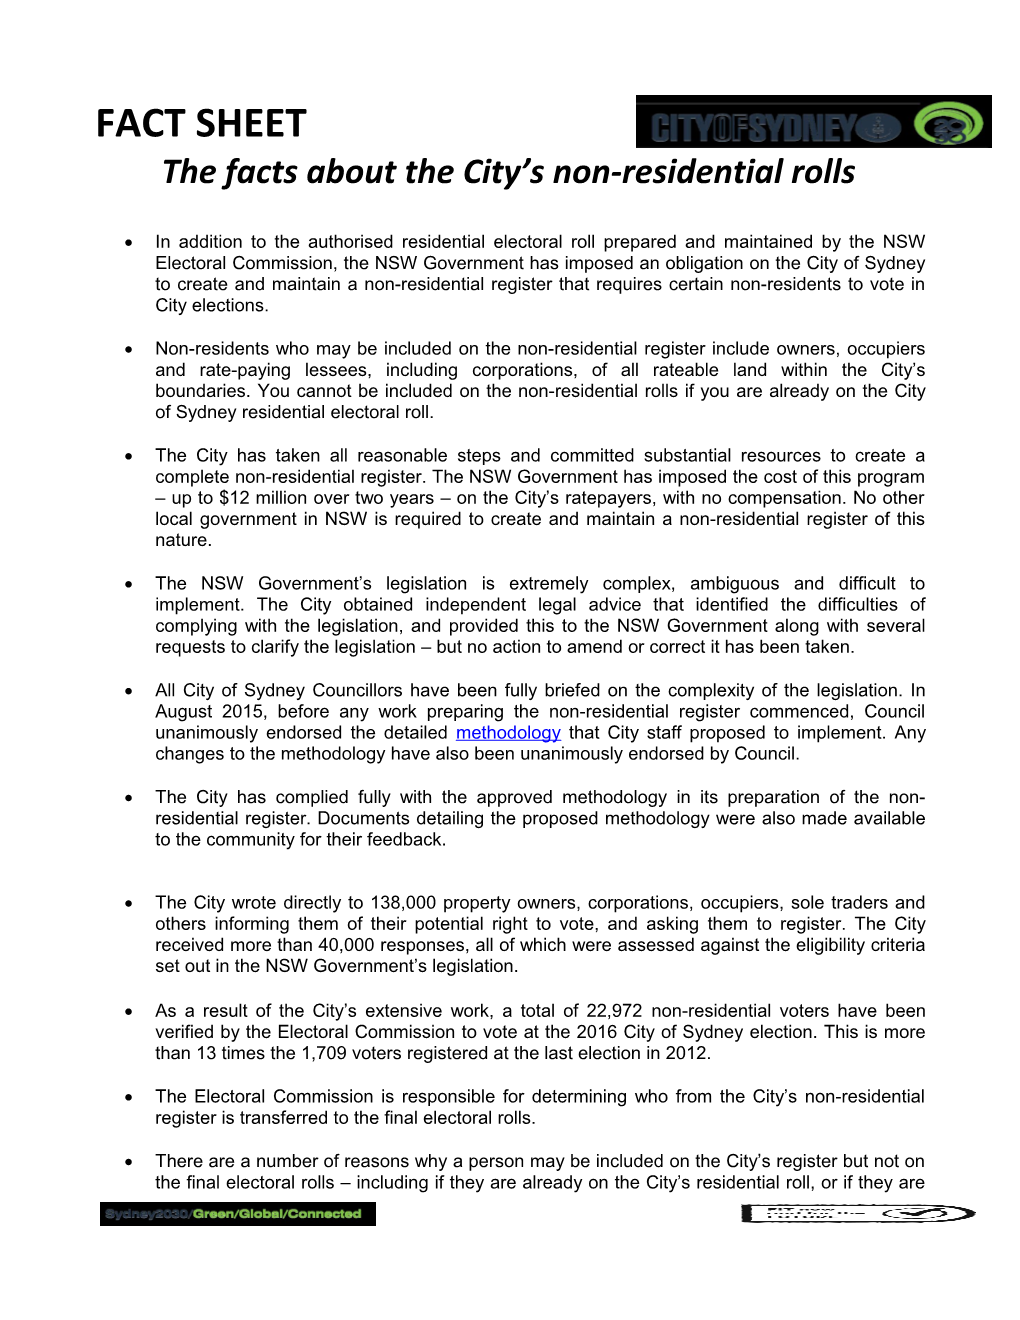 The Facts About the City S Non-Residential Rolls